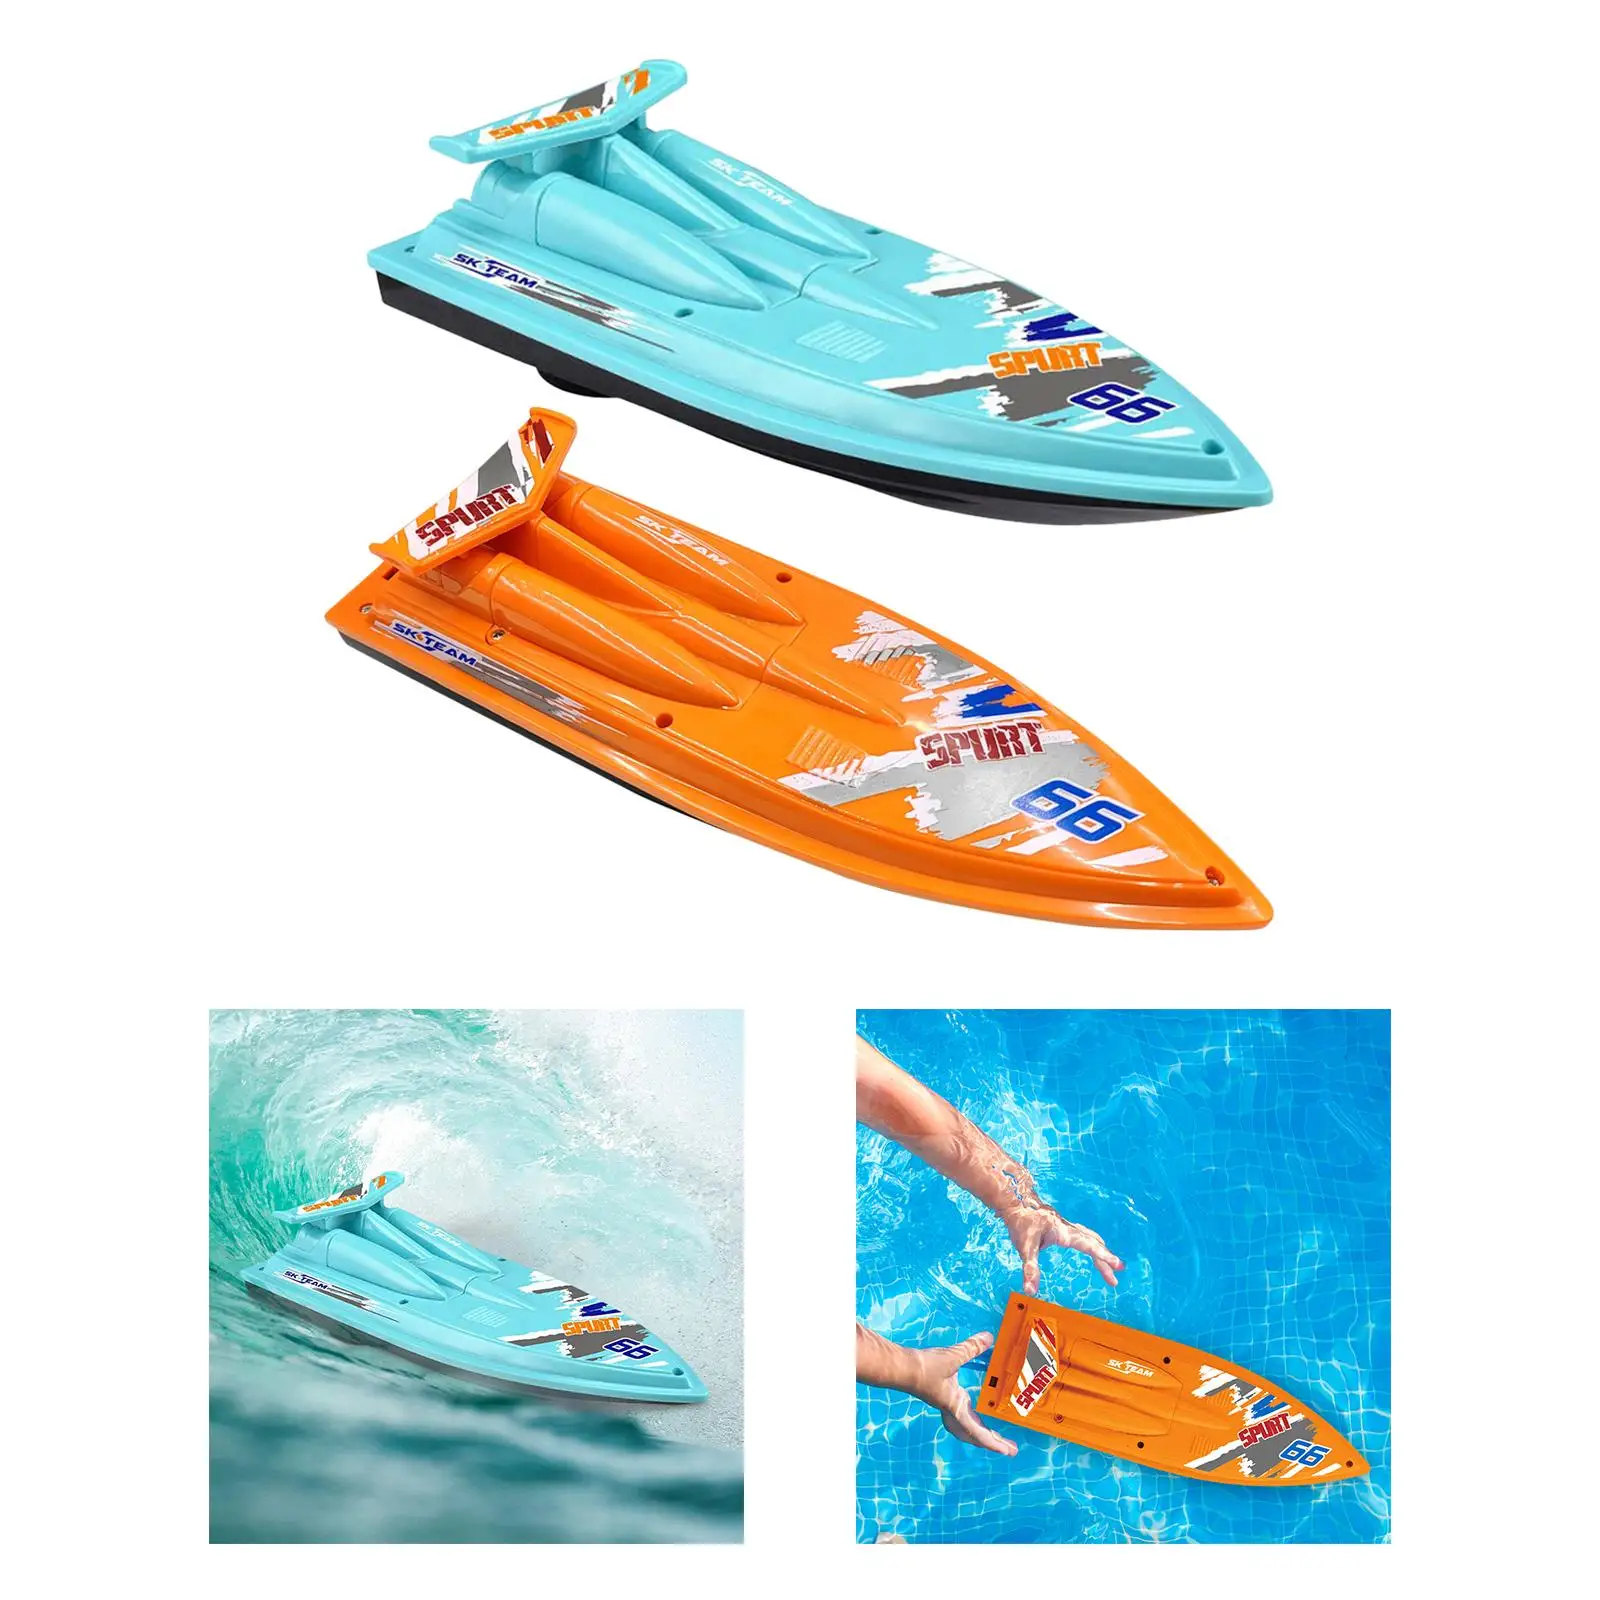 Bath Boat Toy Water Toy Water Playing Fun Bathtub Bath Toy Floating Boat Bath Toy Speed Boat for Kids Birthday Gift Party Favors